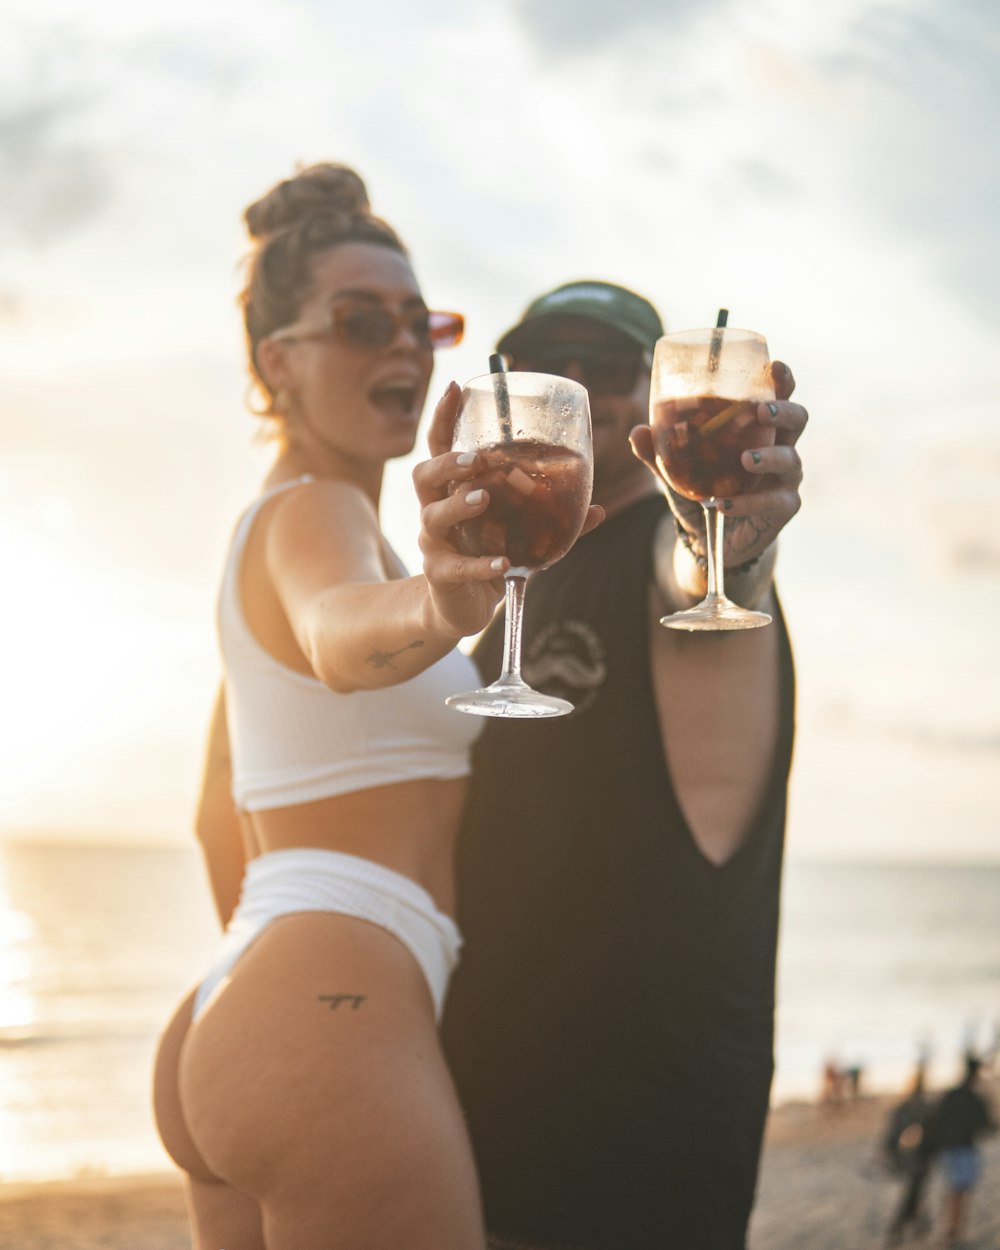 a man and a woman standing on a beach holding wine glasses